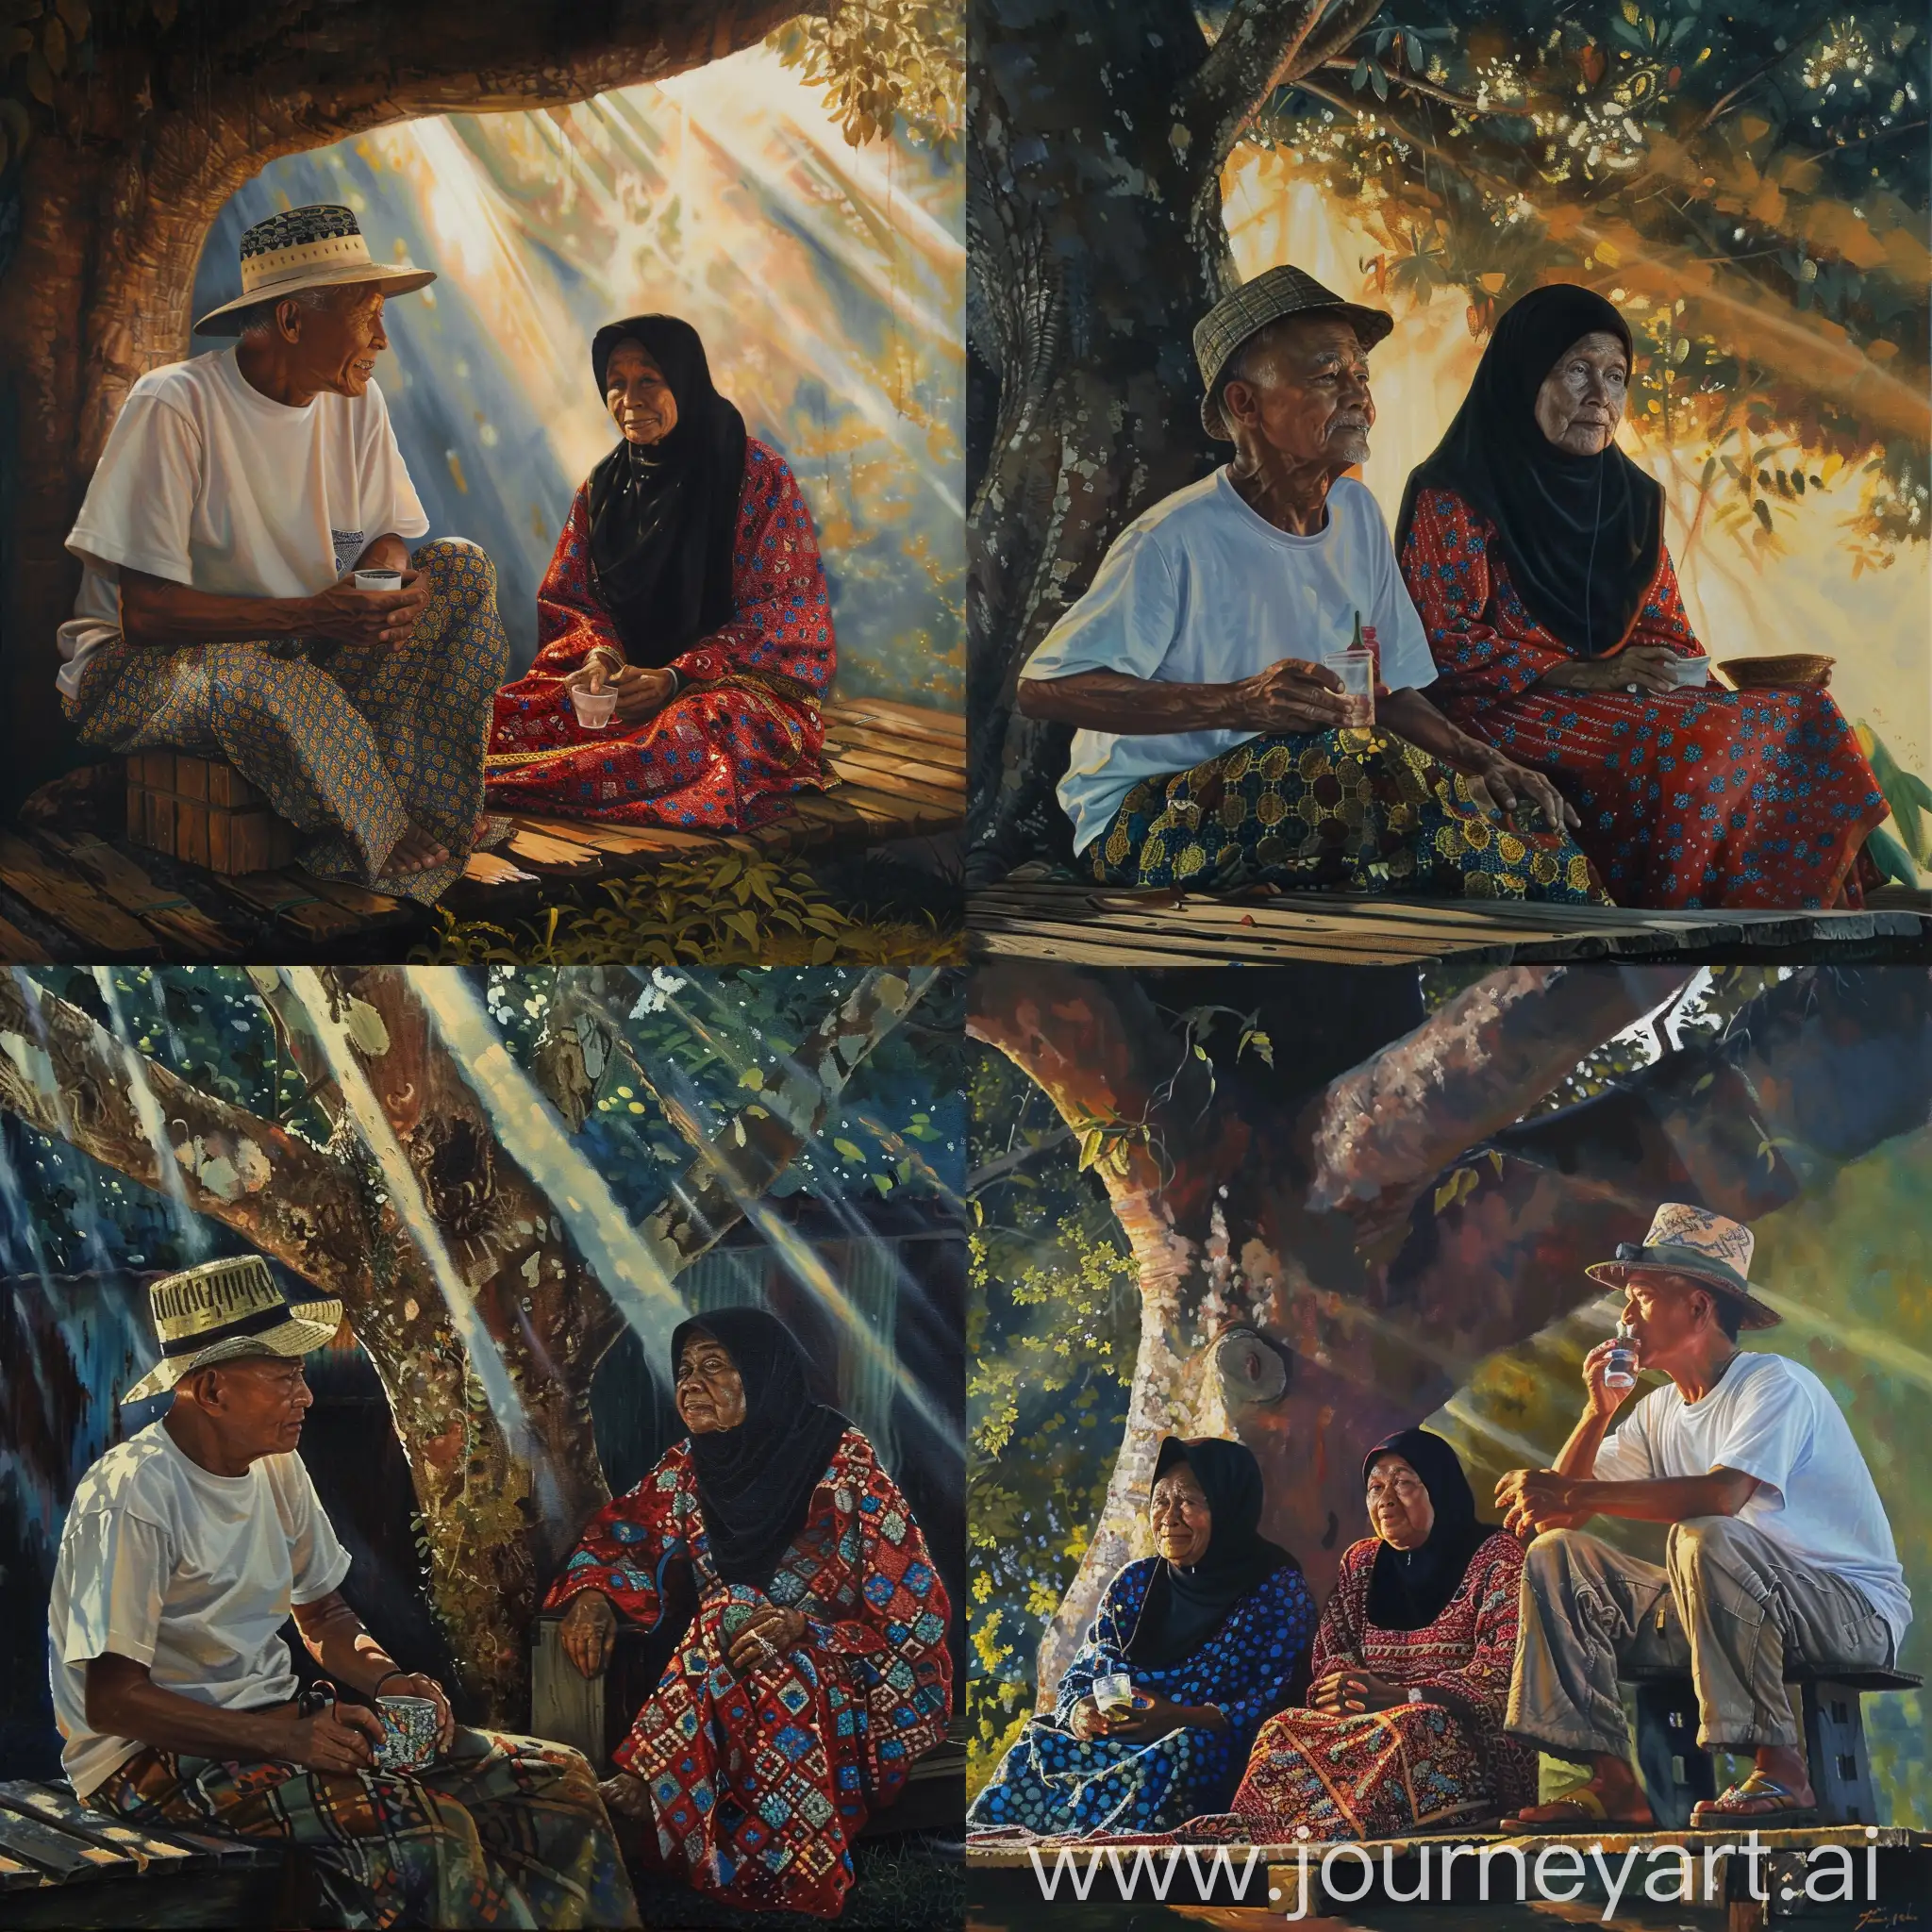 an Old Malay man. wearing a hat wearing a white t-shirt. wear a square-patterned sarong. sitting on a wooden platform. under the tree. while drinking water from a cup. an old Malay woman. black hijab wearing a baju kurung patterned with small blue flowers. wearing red batik fabric with a yellow flower pattern. sitting together on the platform. evening atmosphere. rays of sunlight. low angle view. using oil painting technique